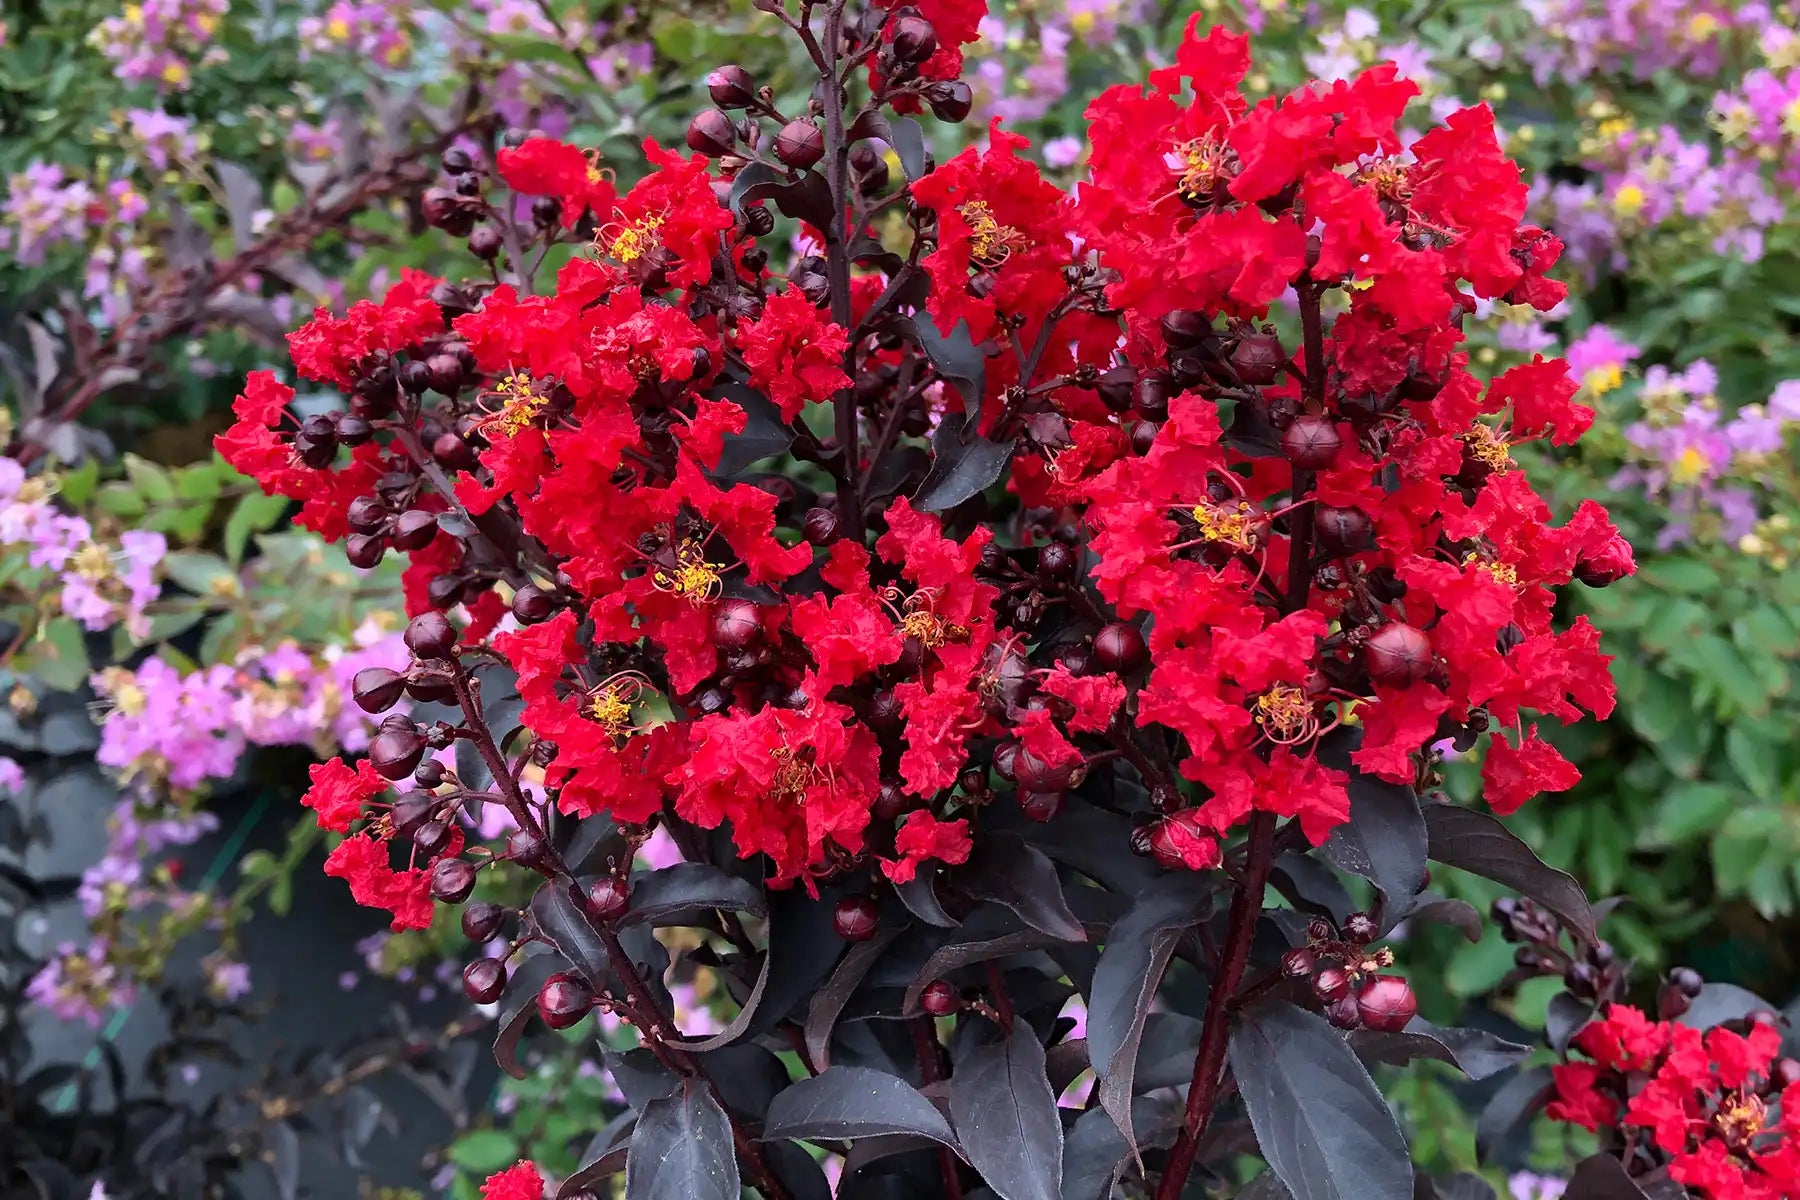 Stunning scarlet ruffly flowers are set against dark, near black foliage of this Center Stage Crape Myrtle that thrives in many climates. 